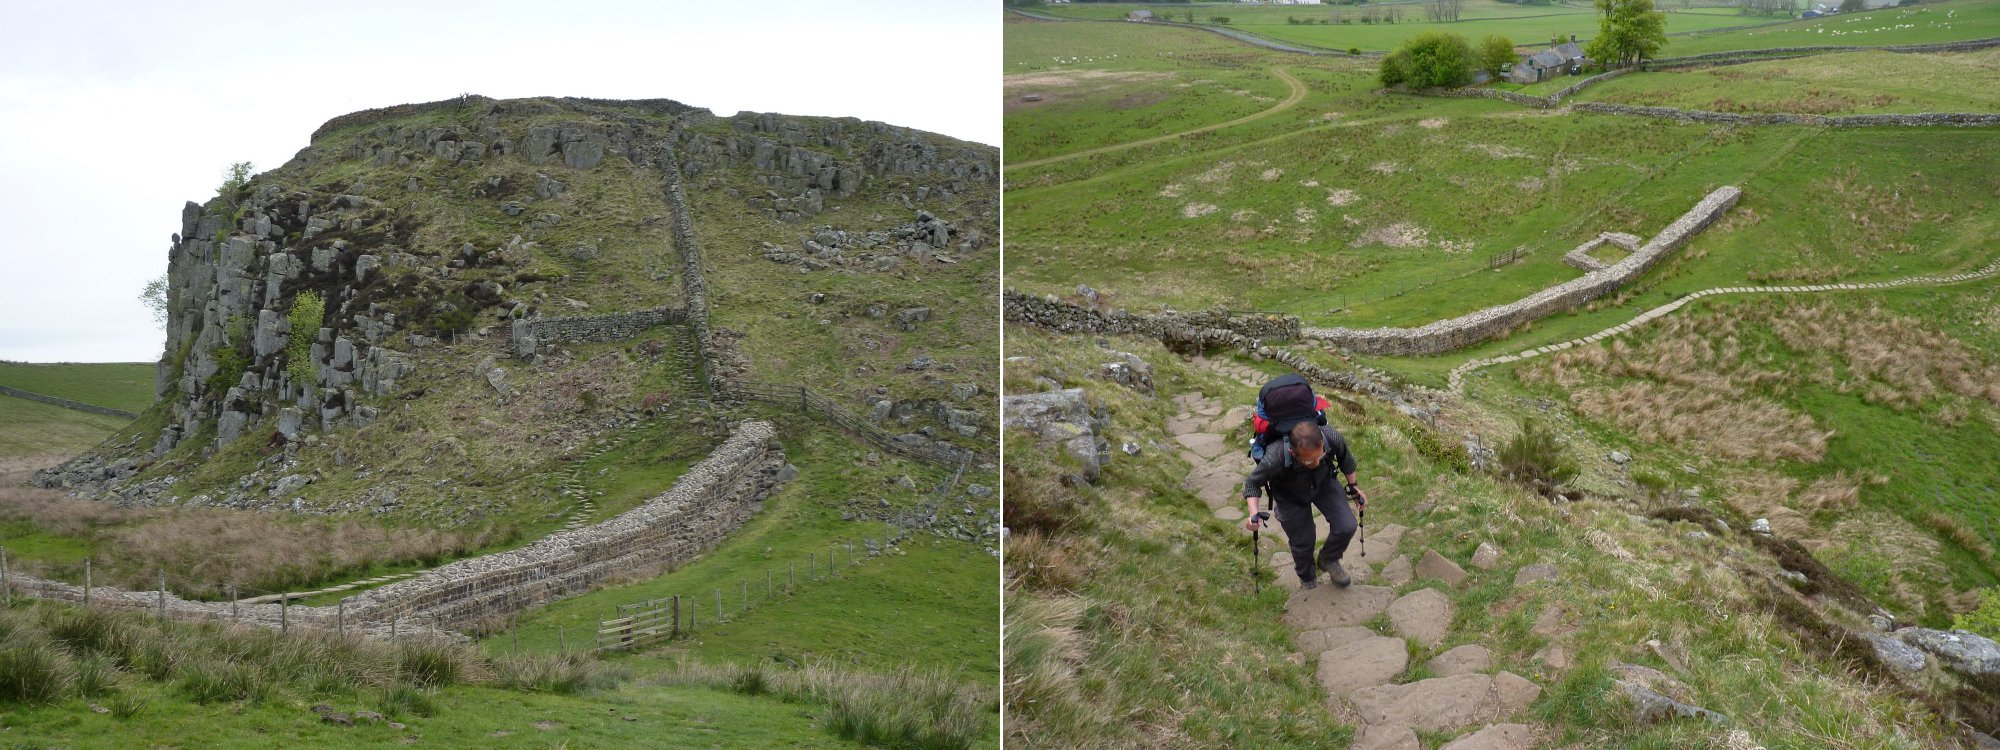 Left to Right: First climb of the day - Steel Rigg, Tony climbs the steps on Steel Rigg